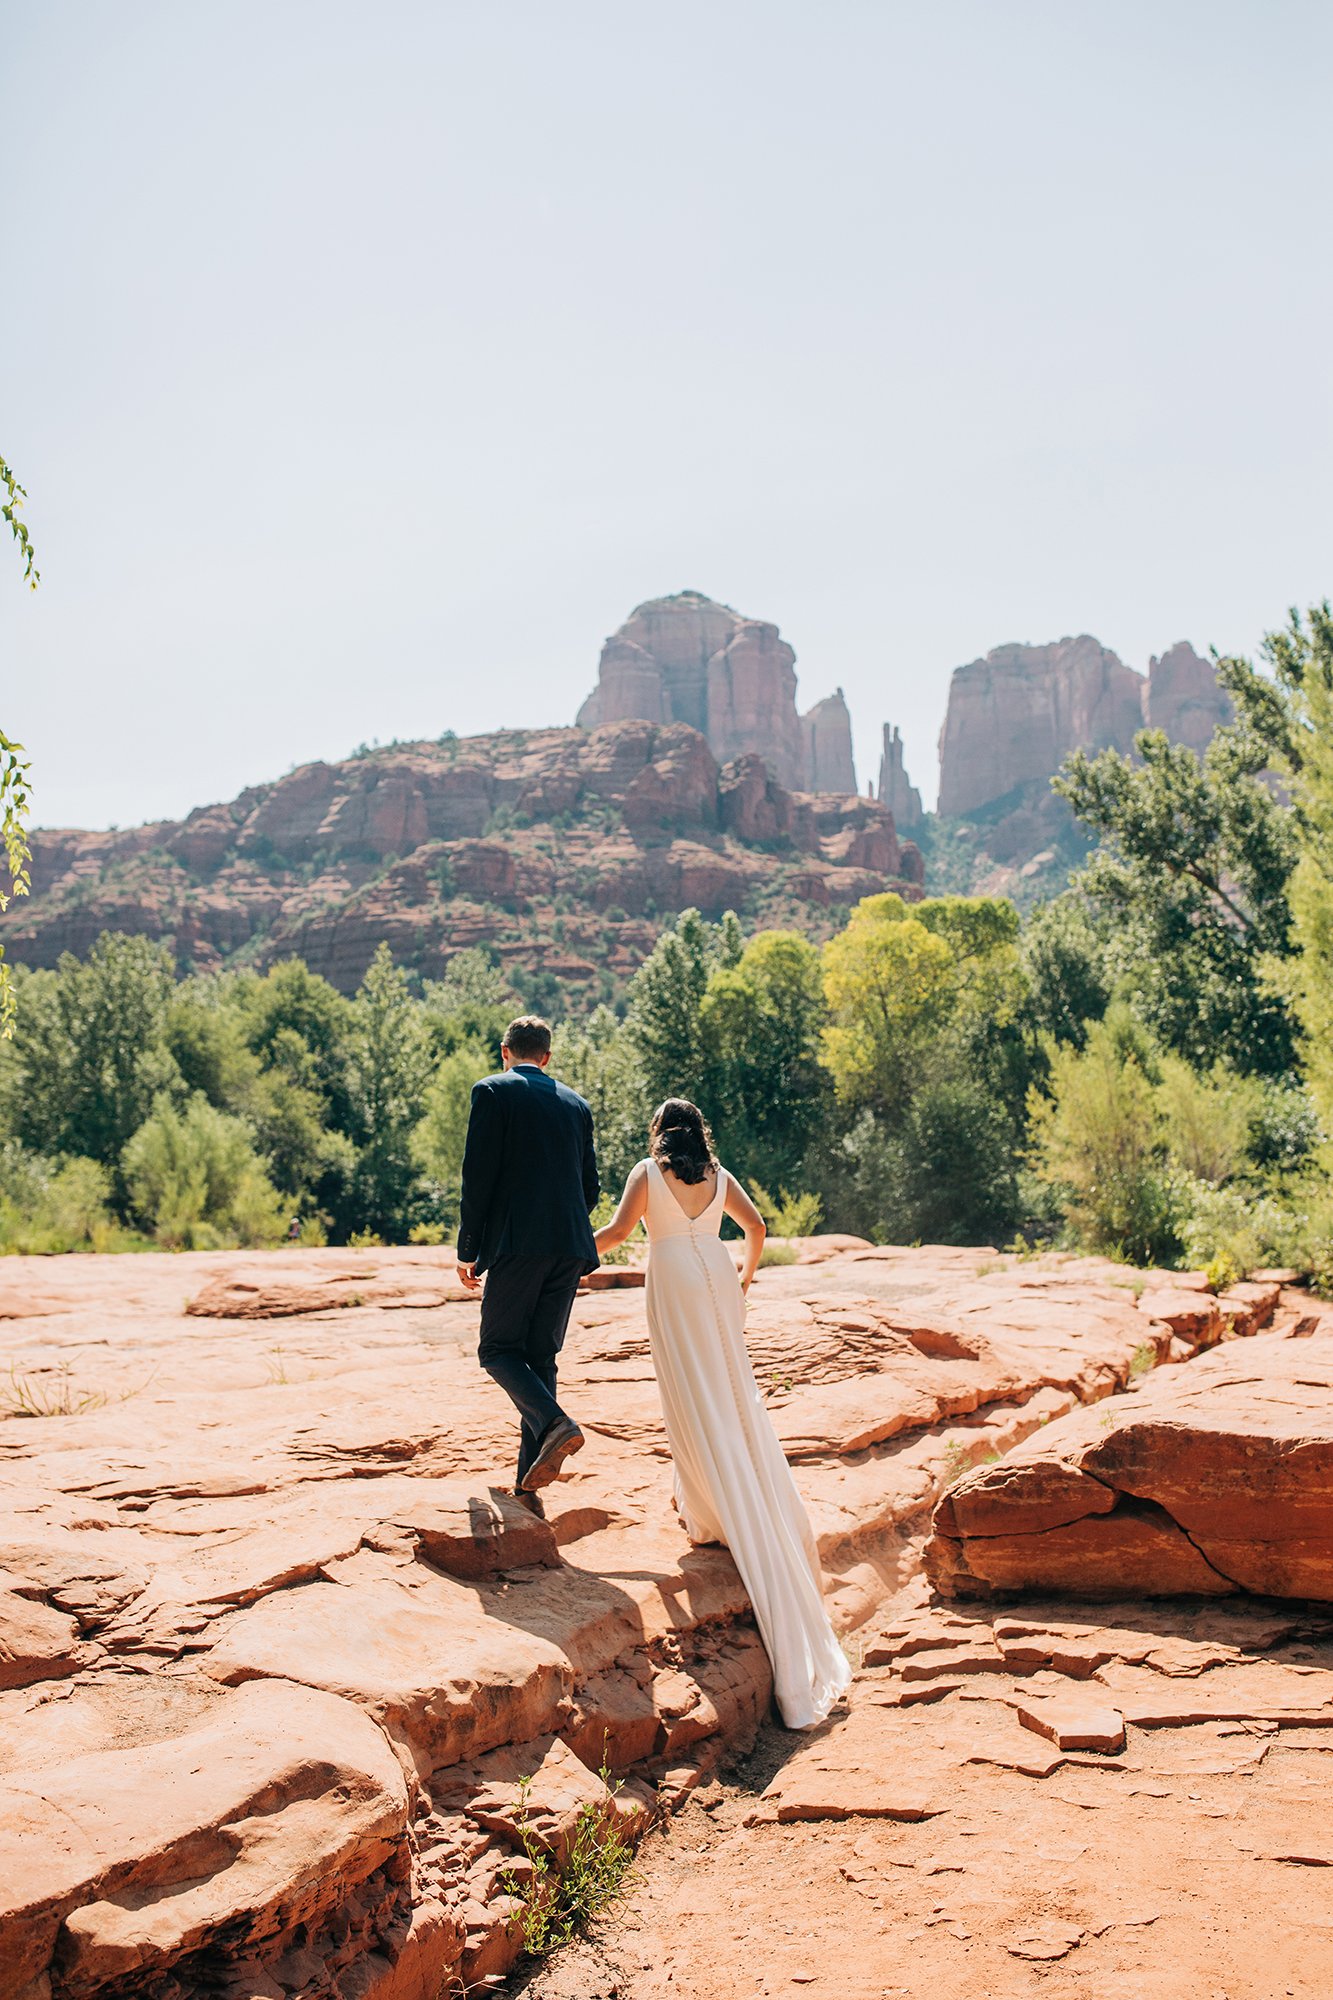 Matthew leads Stephanie through the Sedona landscape, while her long white wedding dress trails behind.